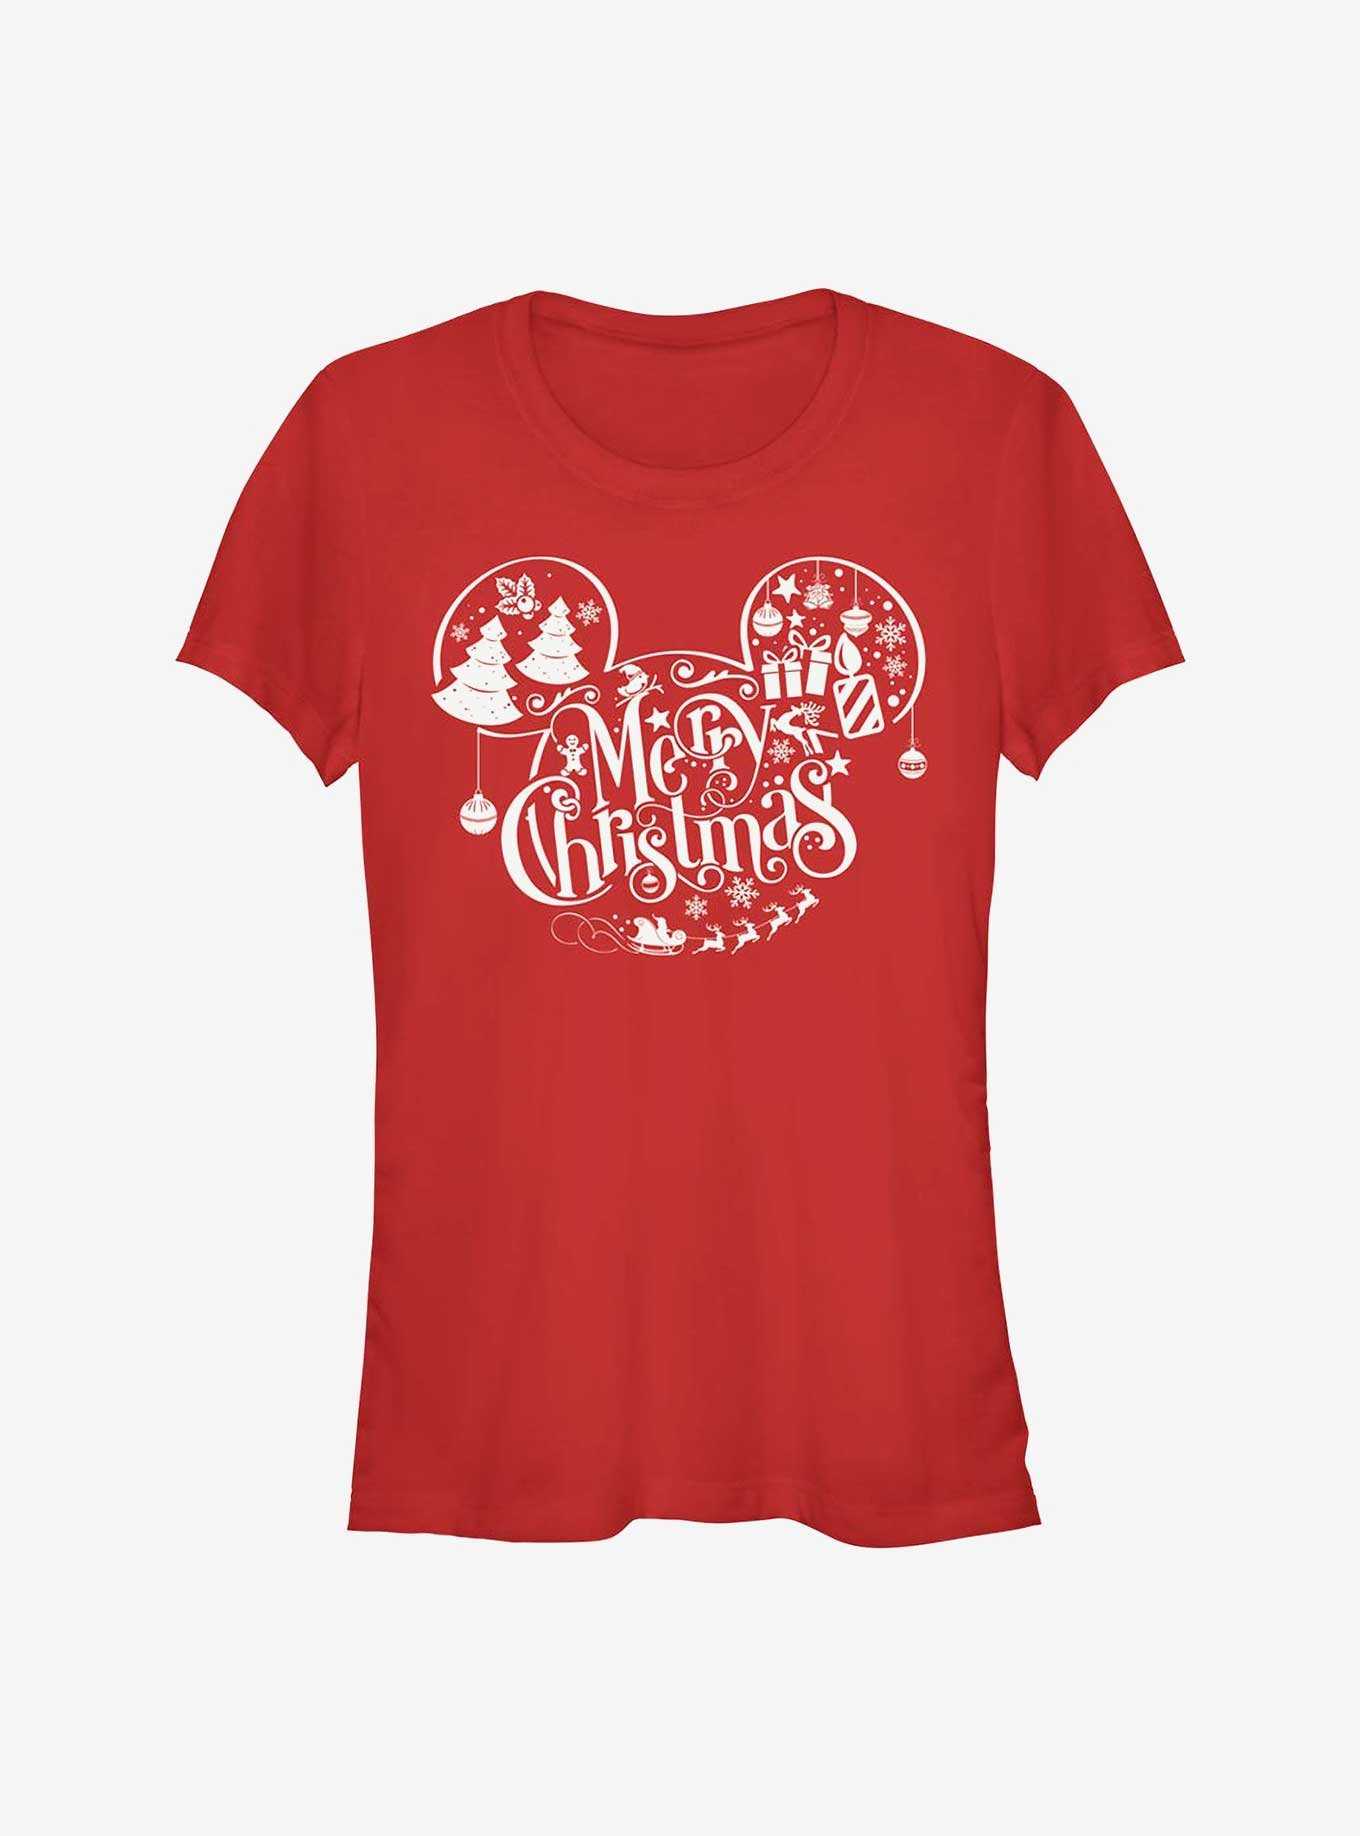 Disney Mickey Mouse Holiday Ears Girls T-Shirt, , hi-res